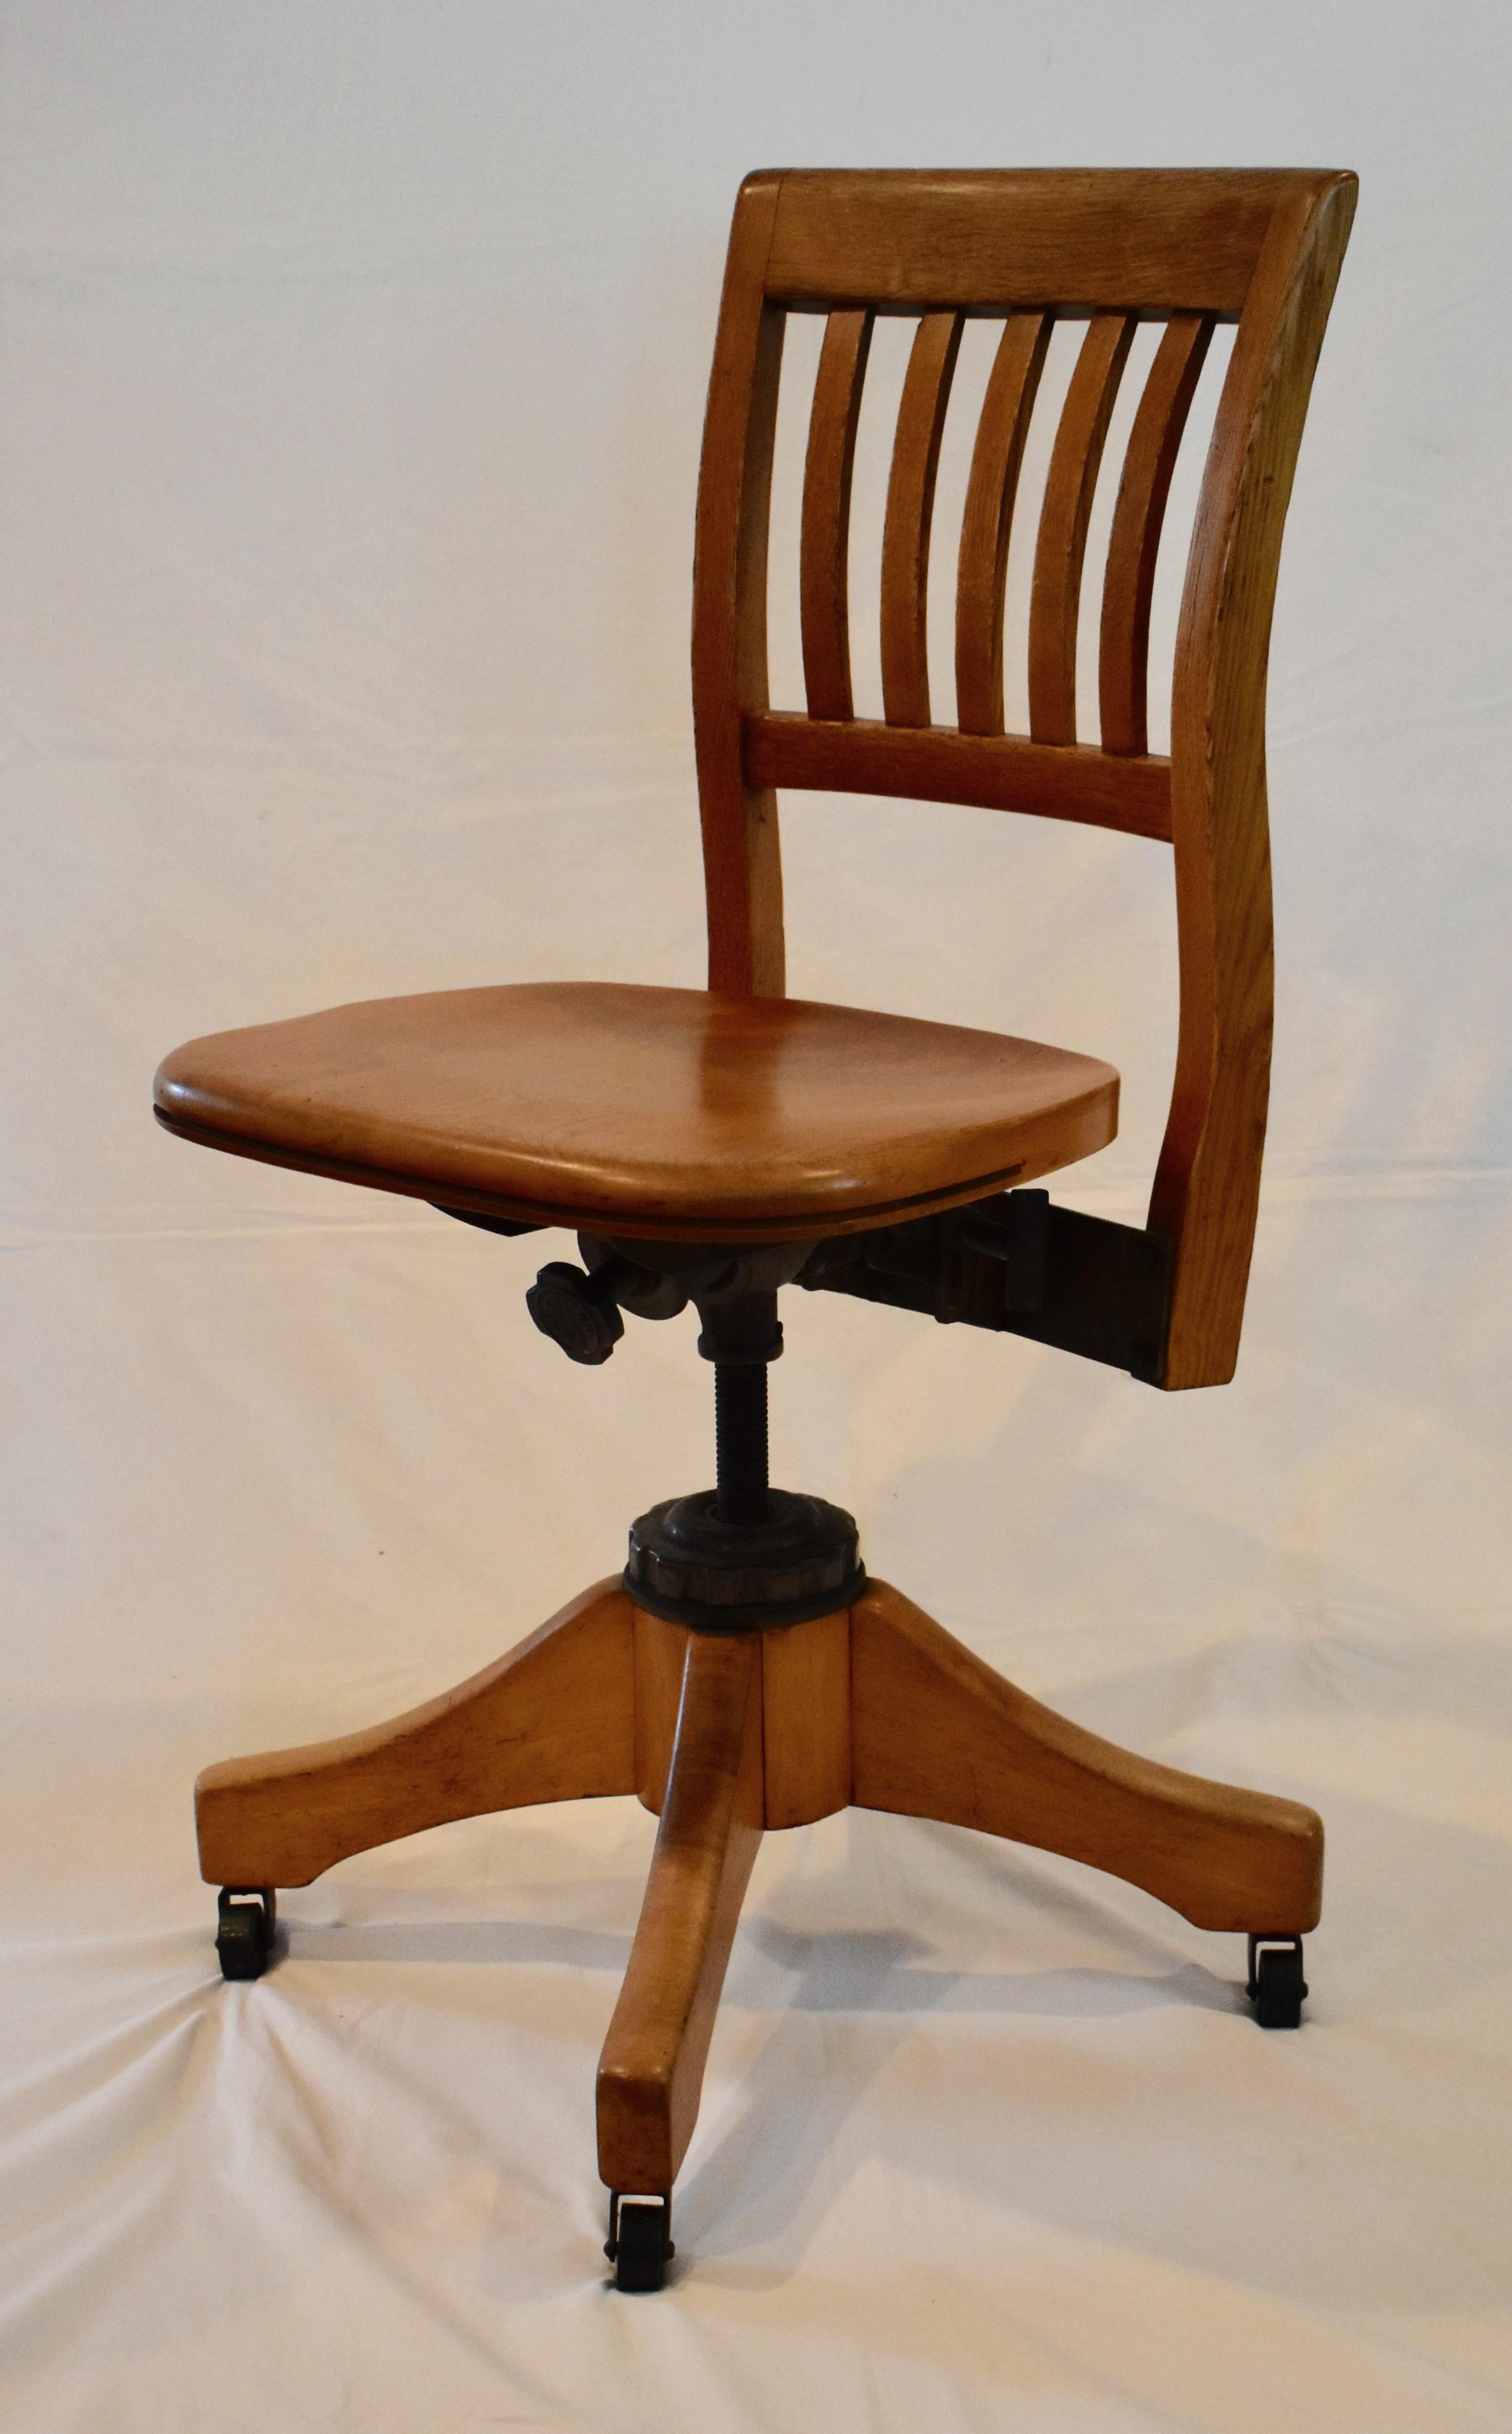 This is a handsome and graceful oak and maple adjustable office chair by the W.H.Gunlocke Company of Wayland, New York. Ergonomically designed, with attractive serpentine back stiles, the steel mechanism of this remarkable chair adjusts for height,